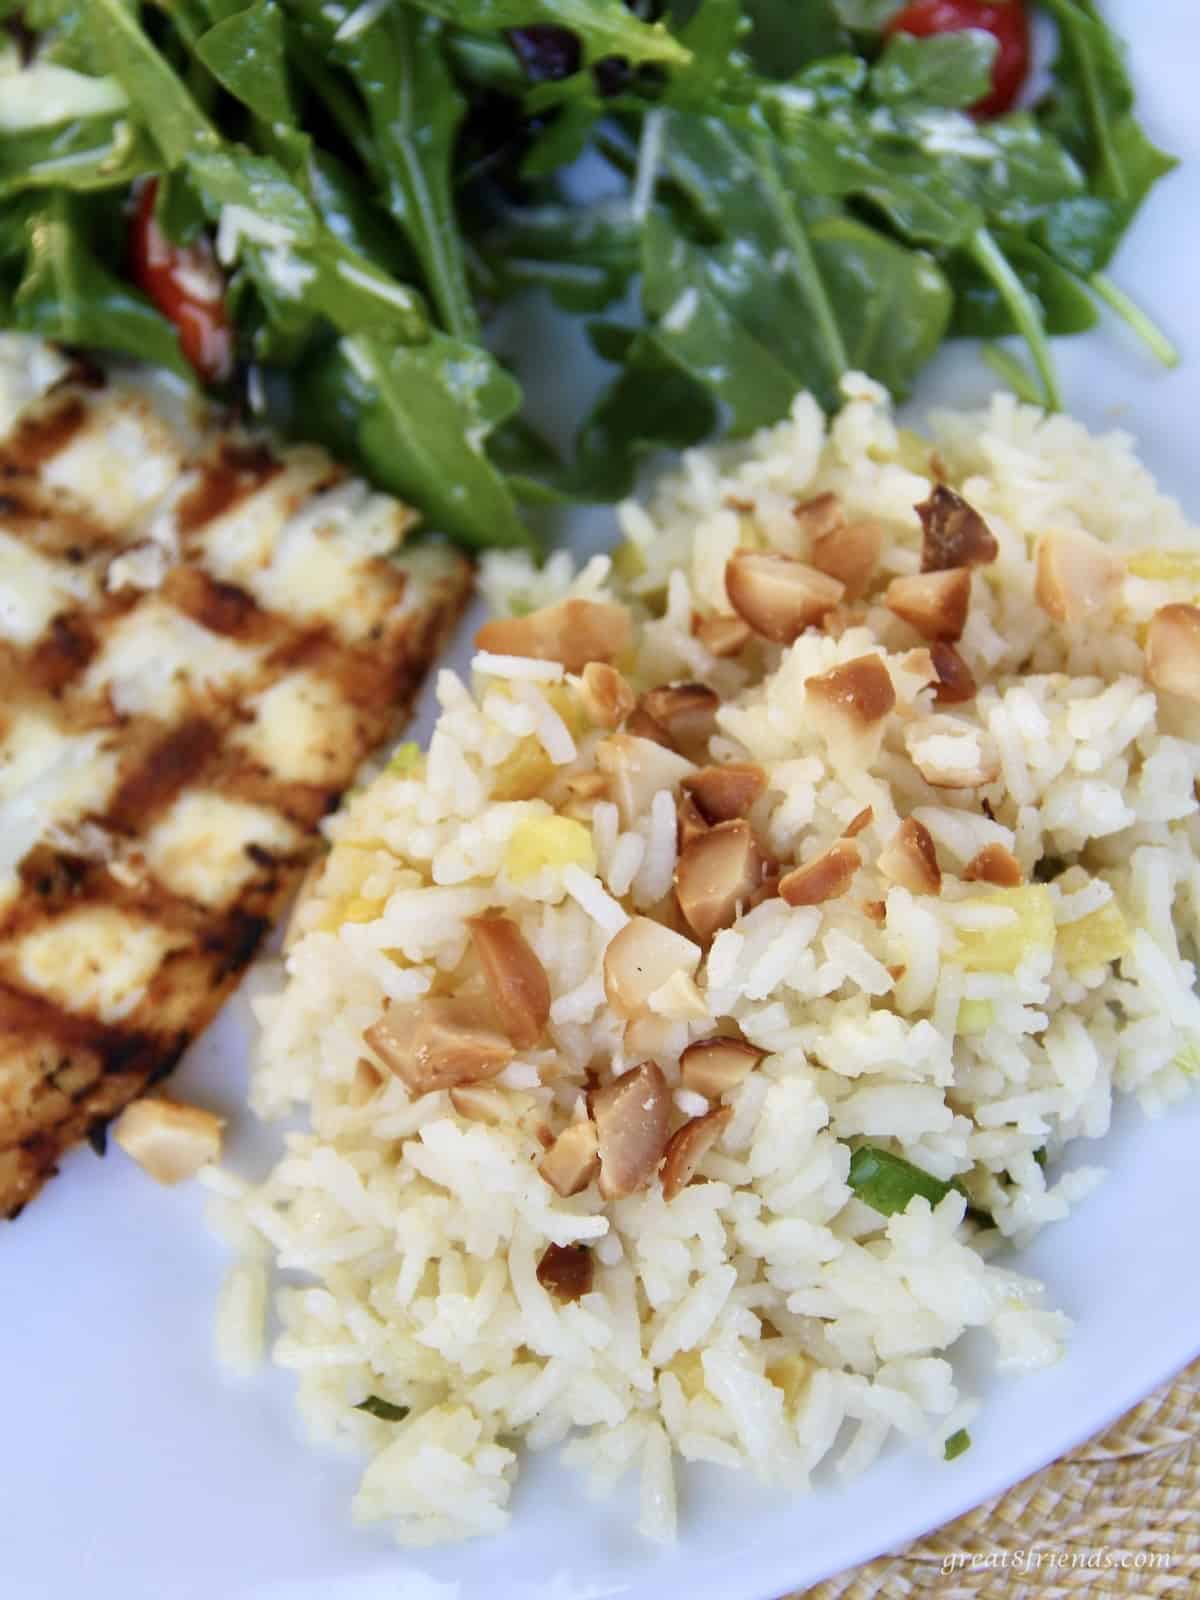 Dinner plate with a rice salad including pineapple and sprinkled with toasted macadamia nuts with a small piece of white fish and a salad on the side.